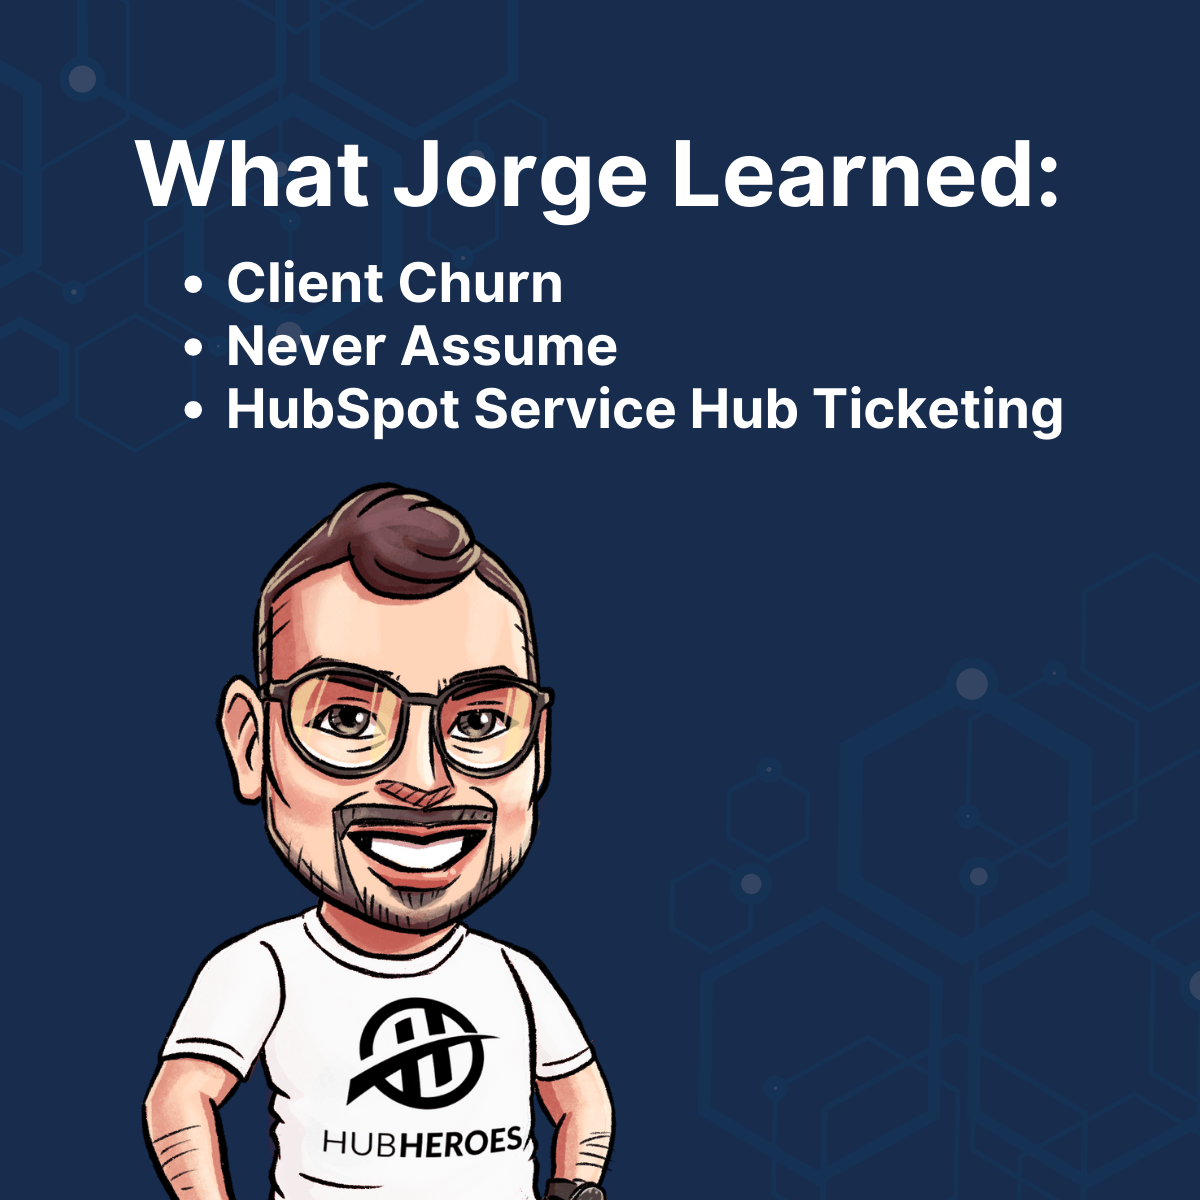 What Jorge learned: Client Churn, Never Assume, and HubSpot Service Hub Ticketing